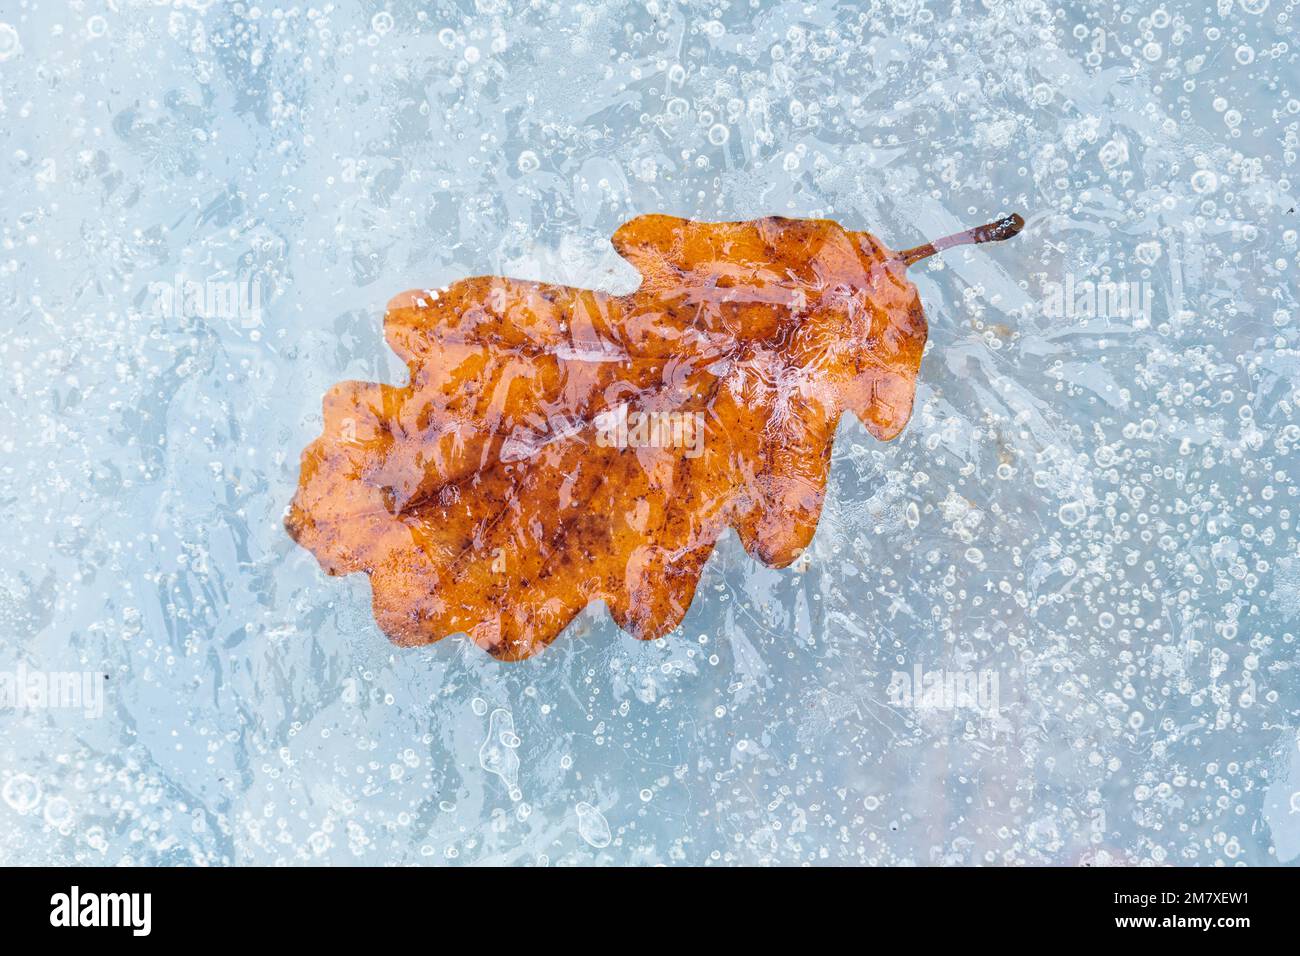 Oak leaf trapped in ice. Stock Photo